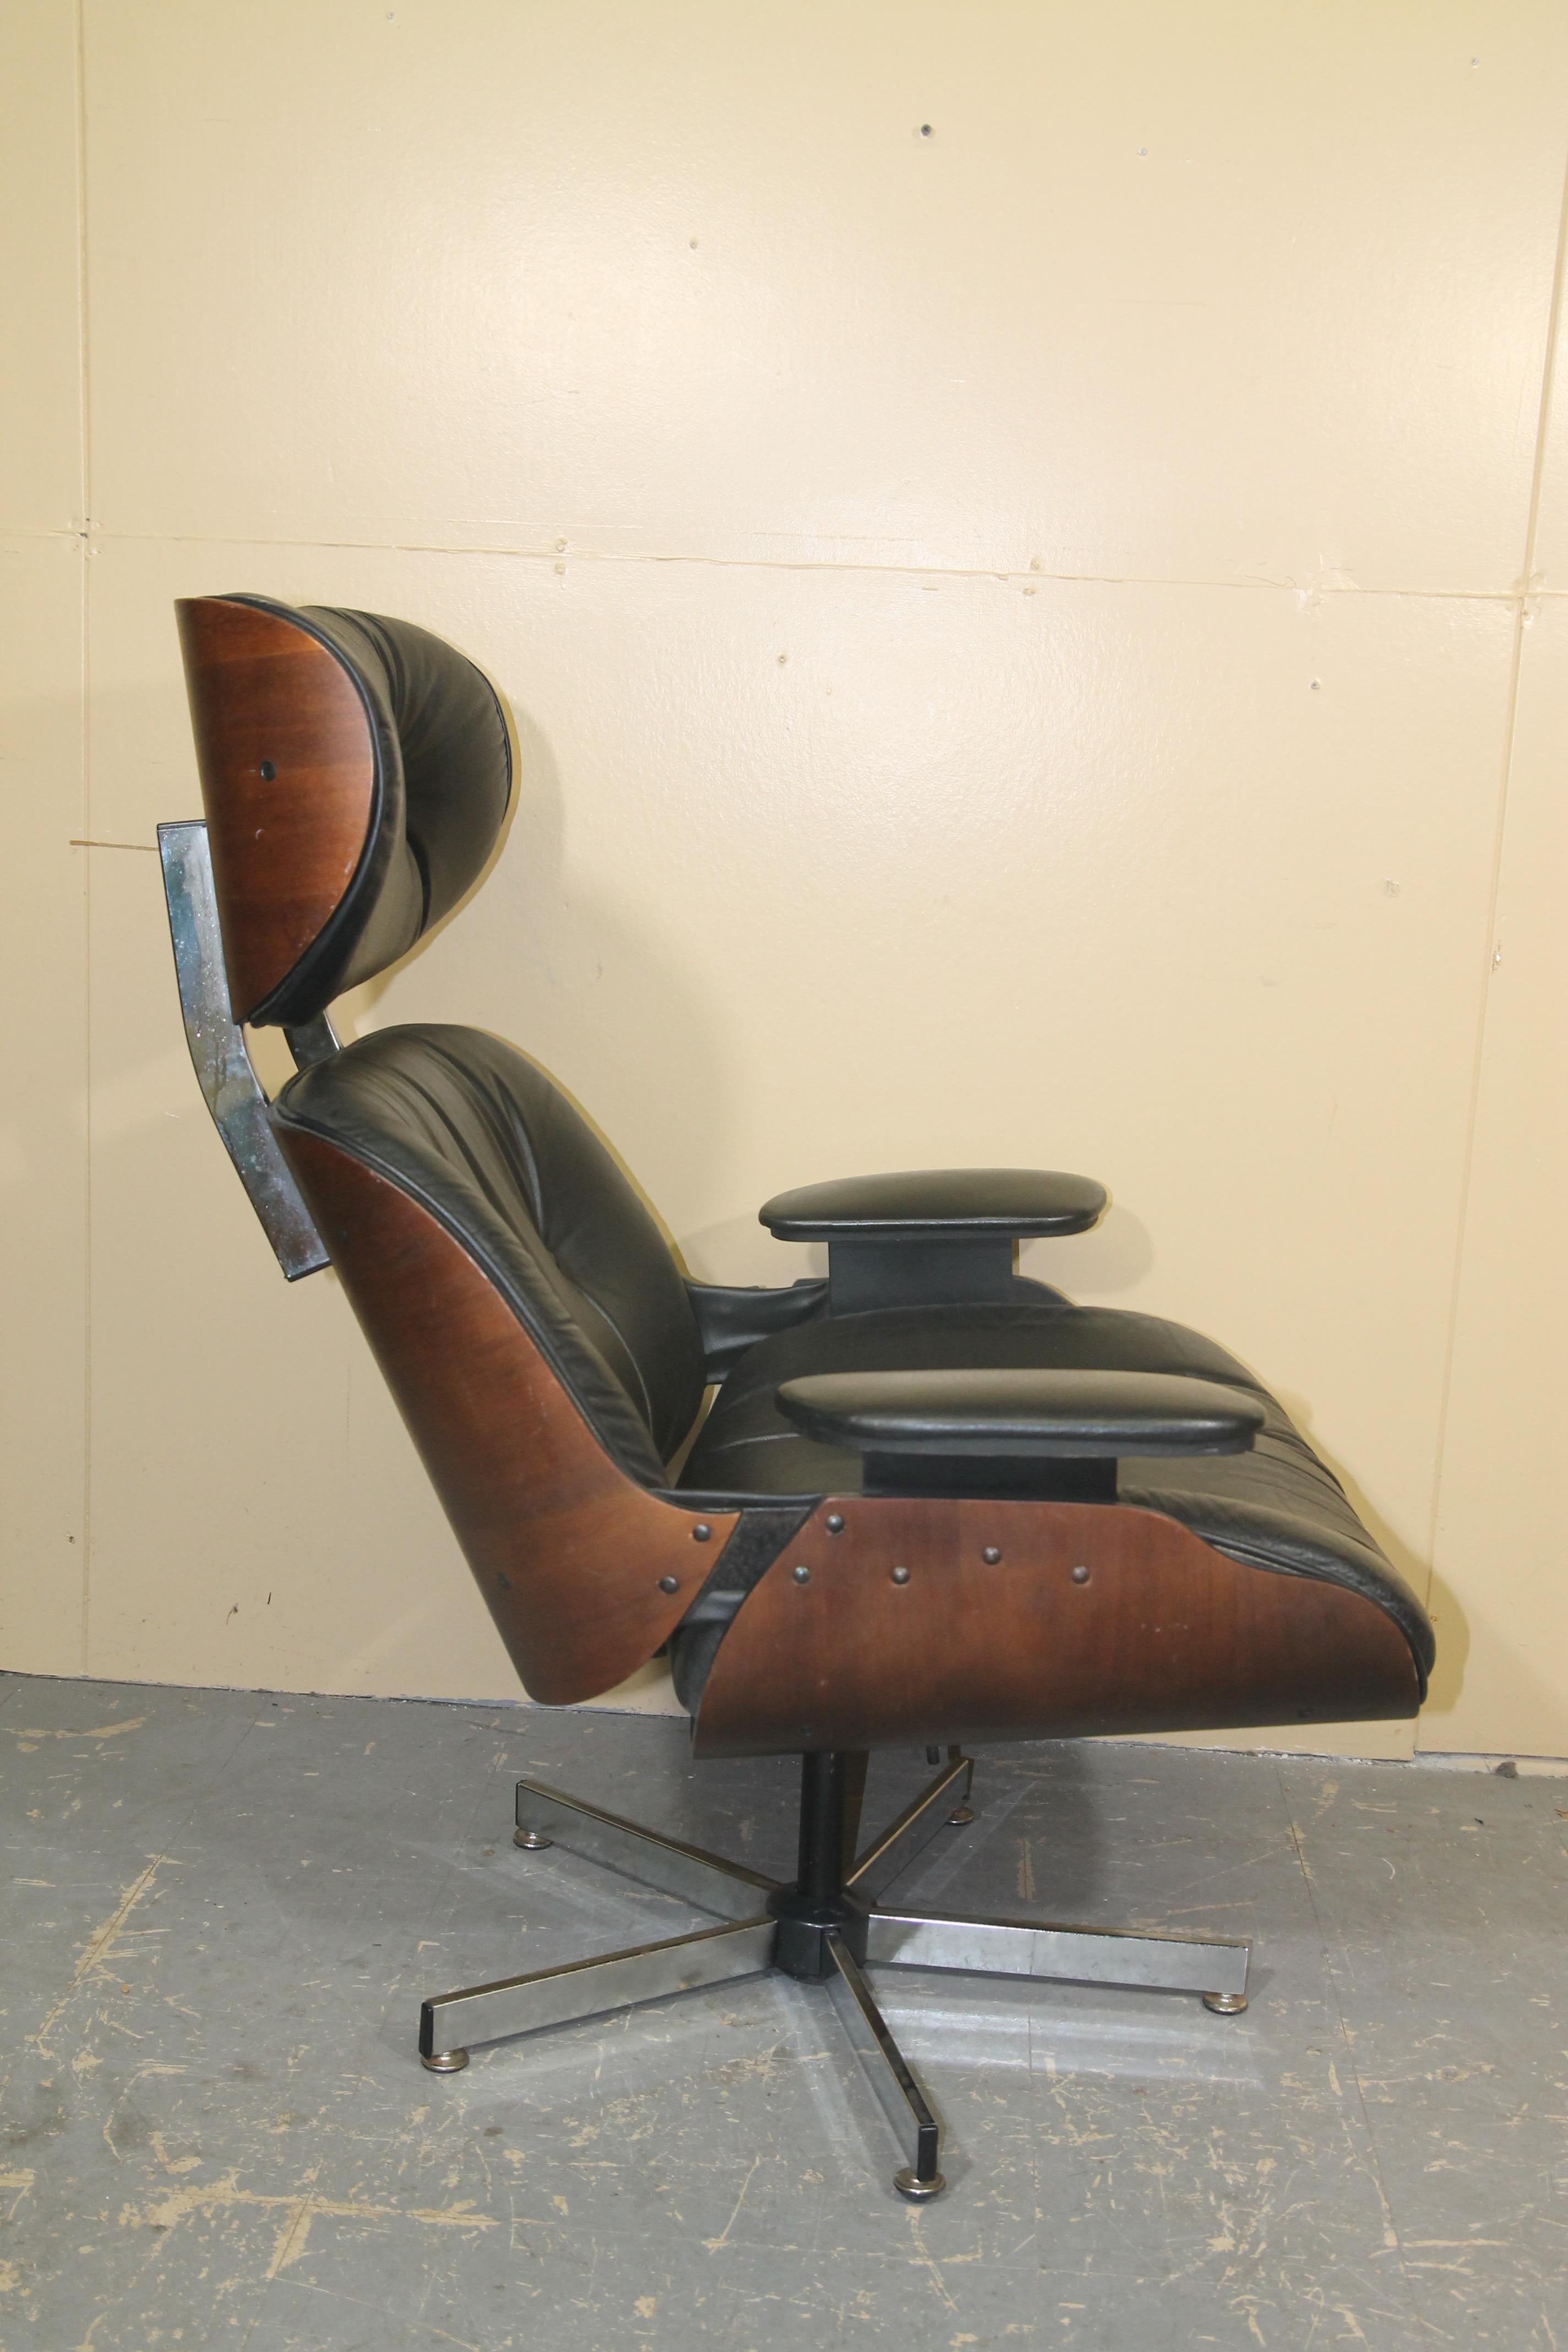 Plycraft Chair and Ottoman in the Style of the Eames 670 Lounge Chair In Good Condition In Asbury Park, NJ